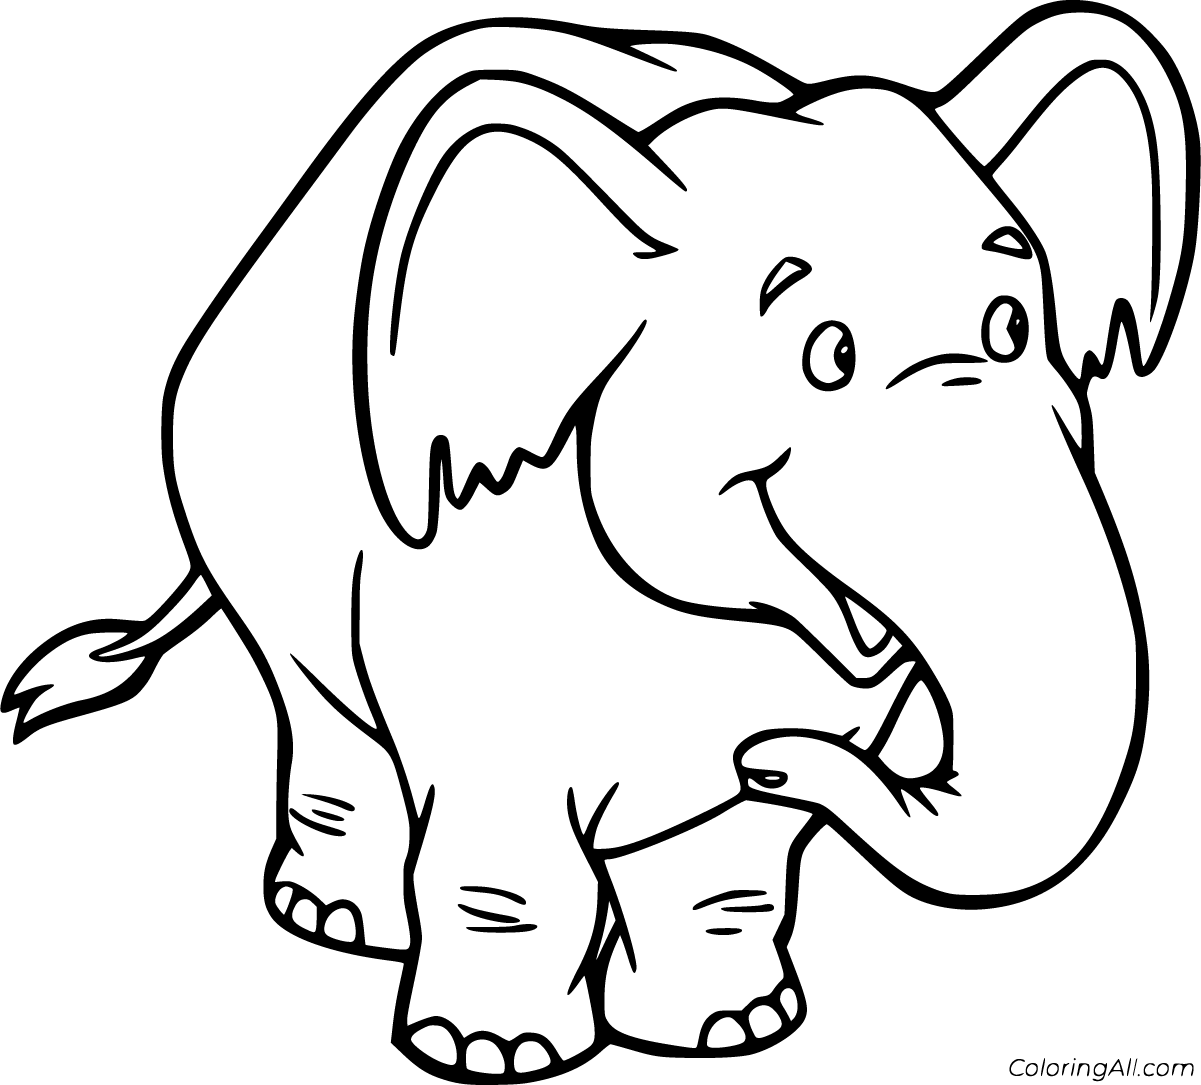 Elephant Coloring Pages - ColoringAll